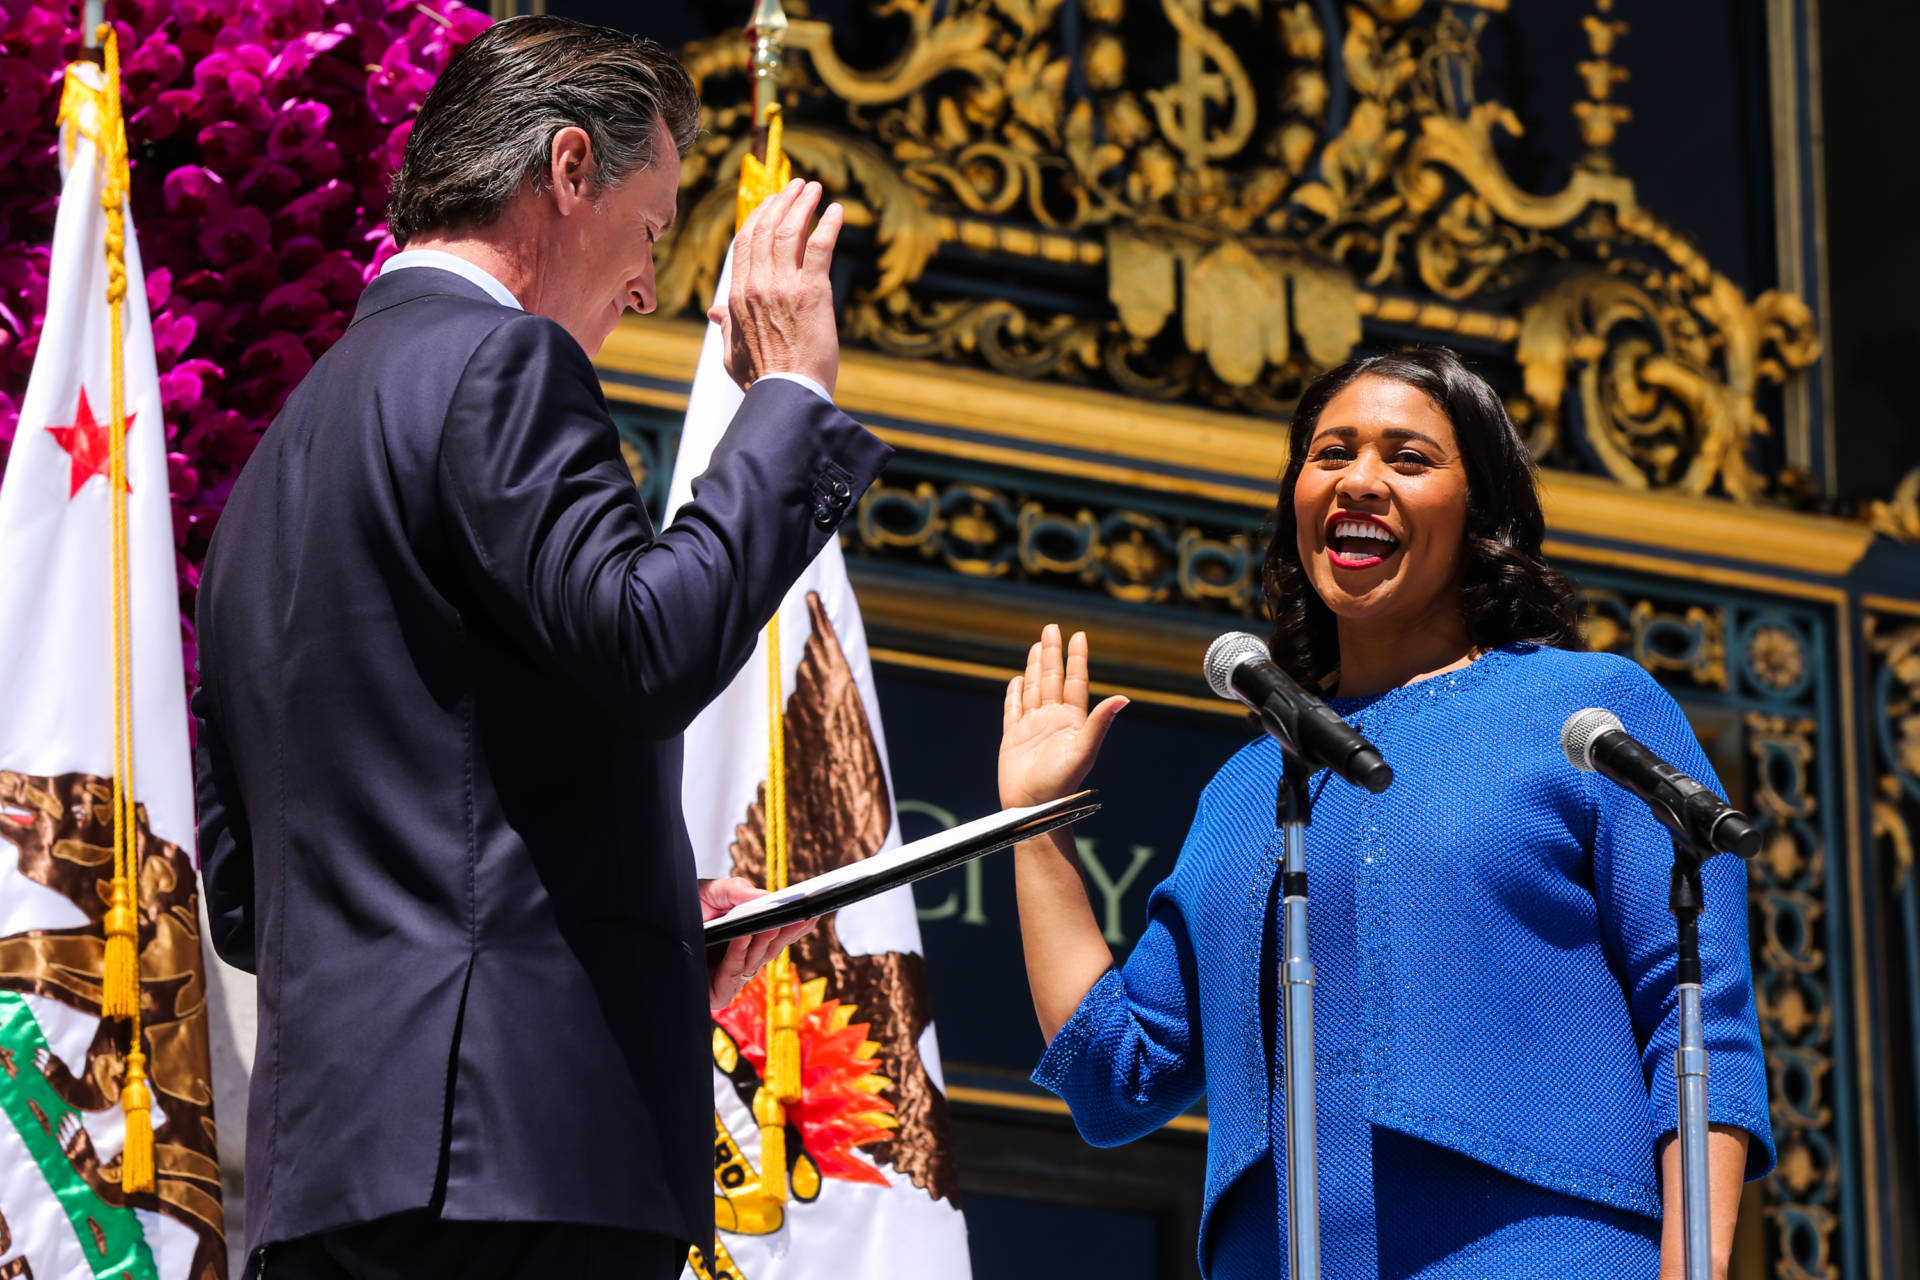 Mayor London Breed takes the oath of office from Lt. Gov. Gavin Newsom during the inauguration ceremony outside City Hall in San Francisco, California, on Wednesday, July 11, 2018. San Francisco Chronicle Pool Photo